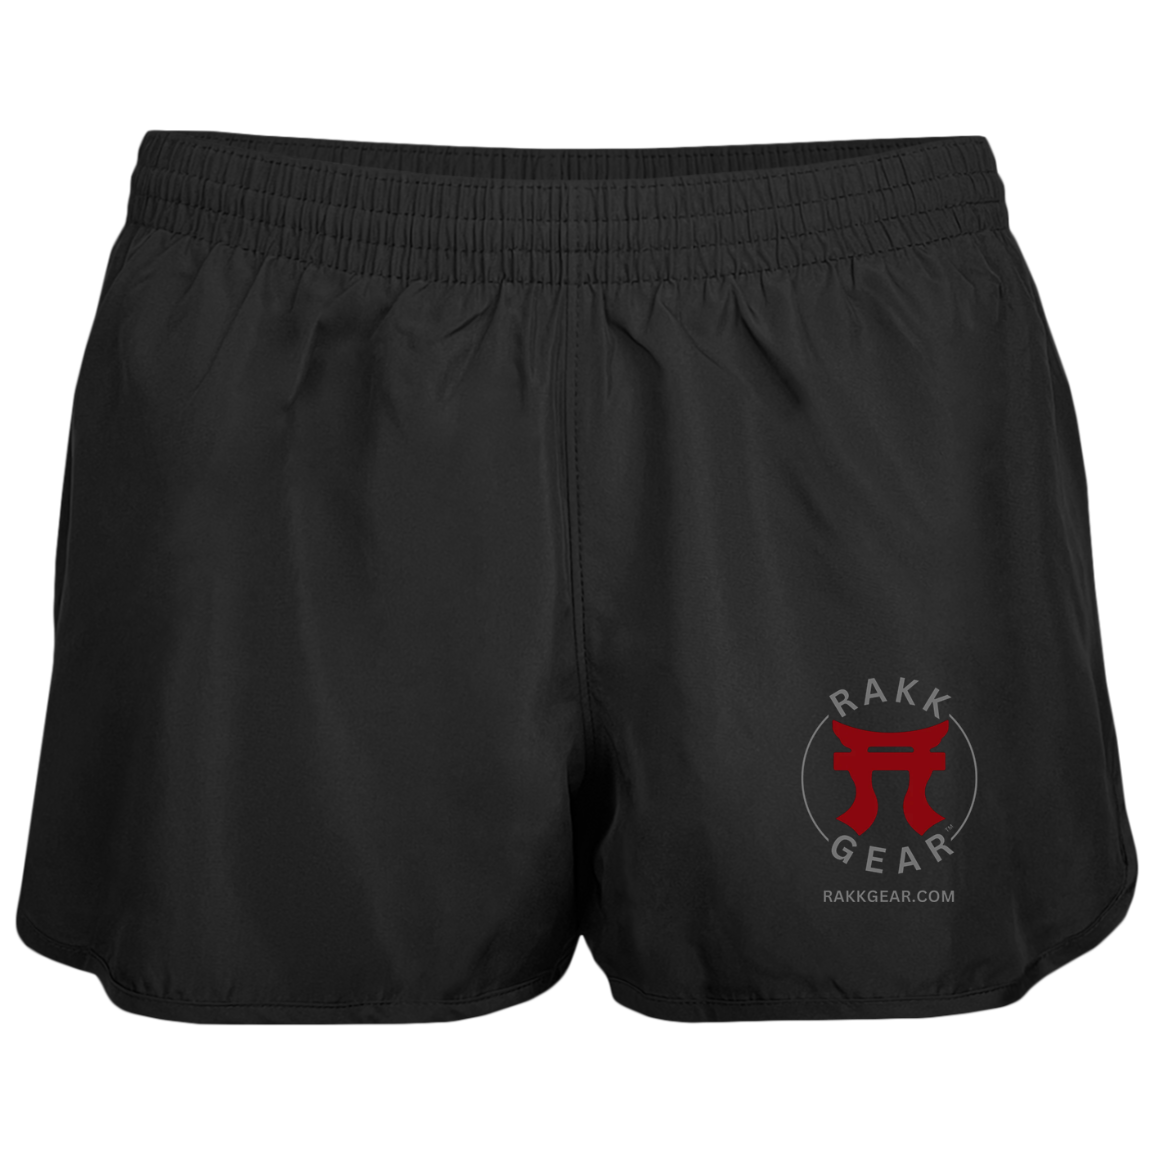 "Rakkgear Women's Wayfarer Running Shorts in Black, ideal for active pursuits with comfort and style in mind."